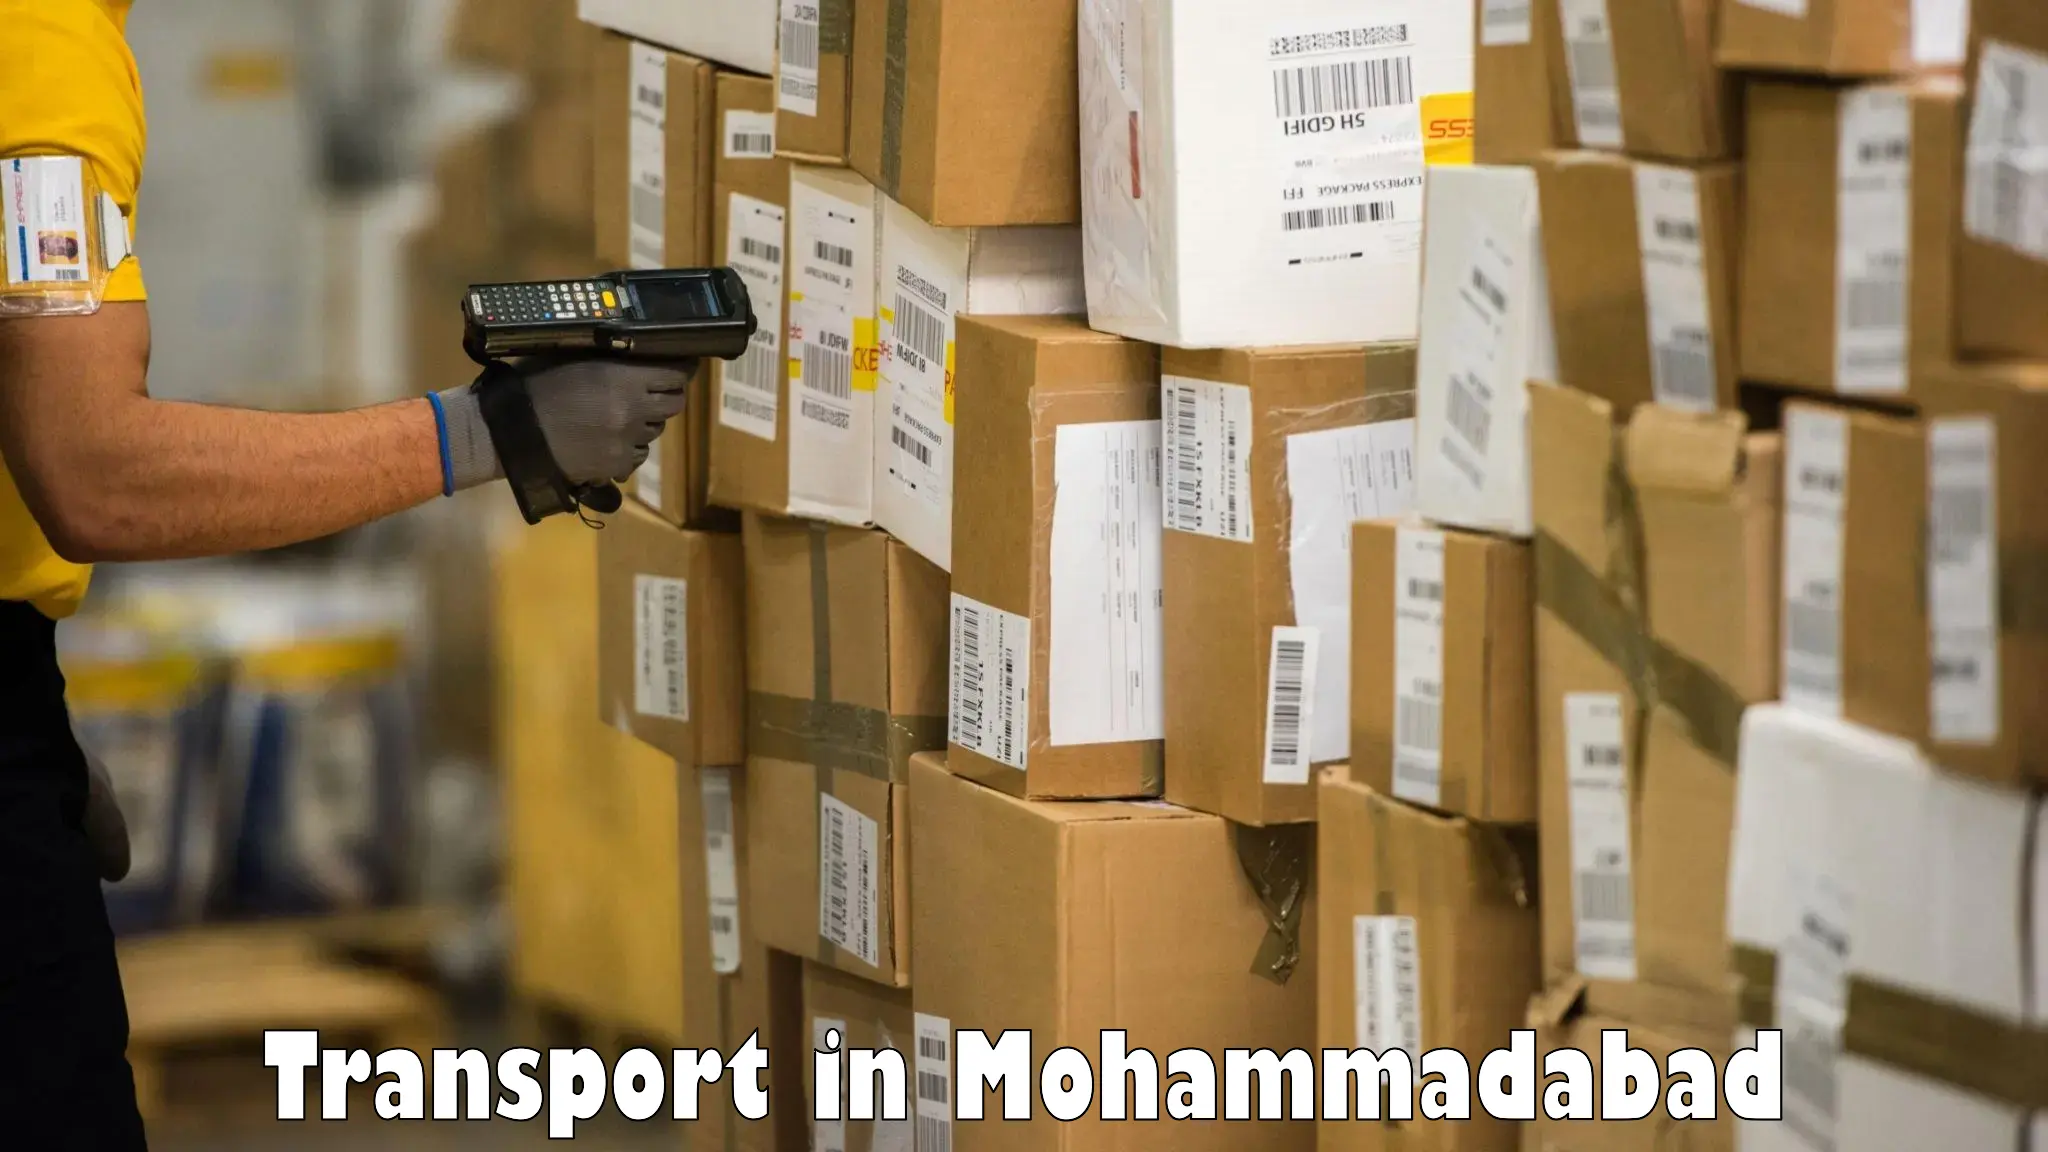 Lorry transport service in Mohammadabad